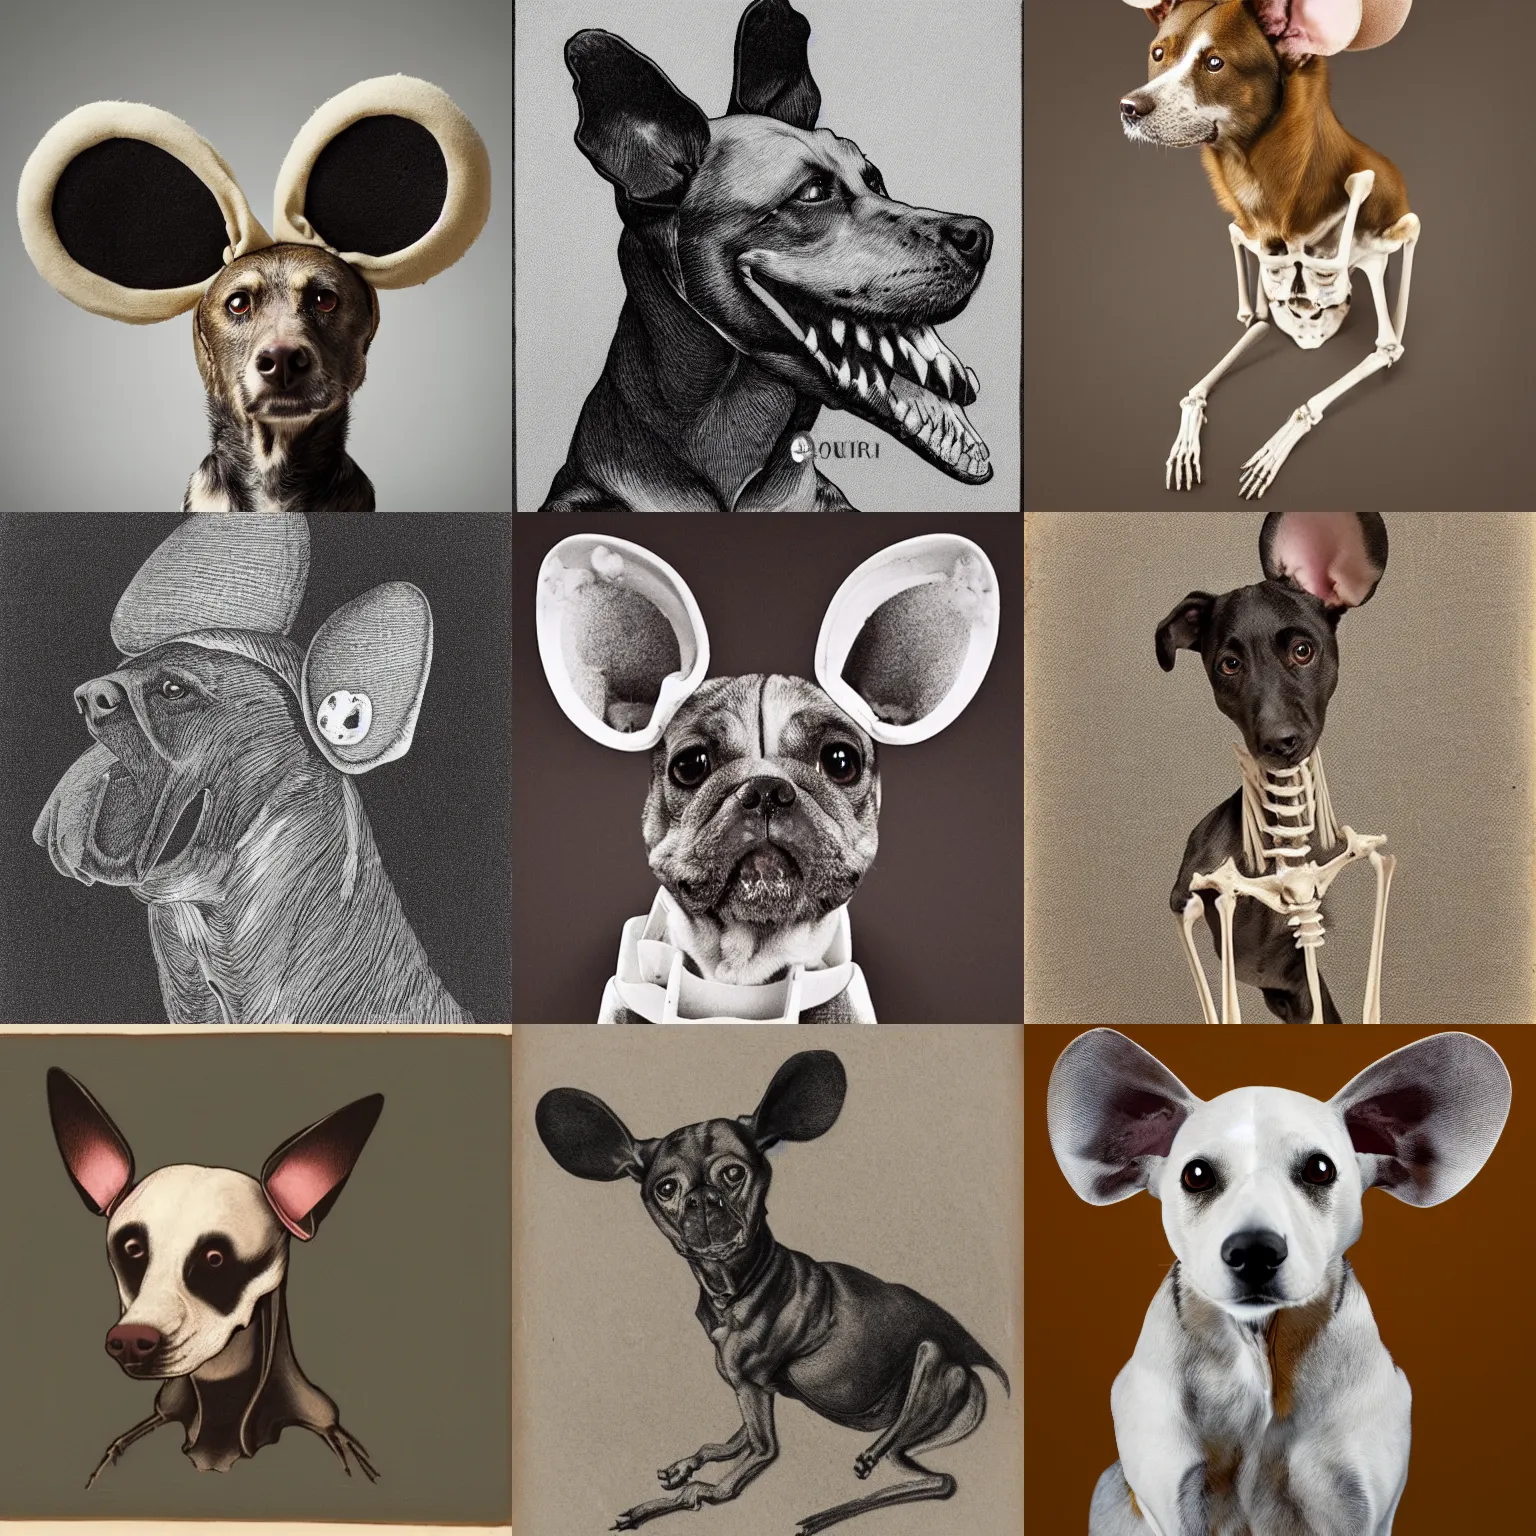 Prompt: portrait of a dog like creature with mouse ears and exposed bones